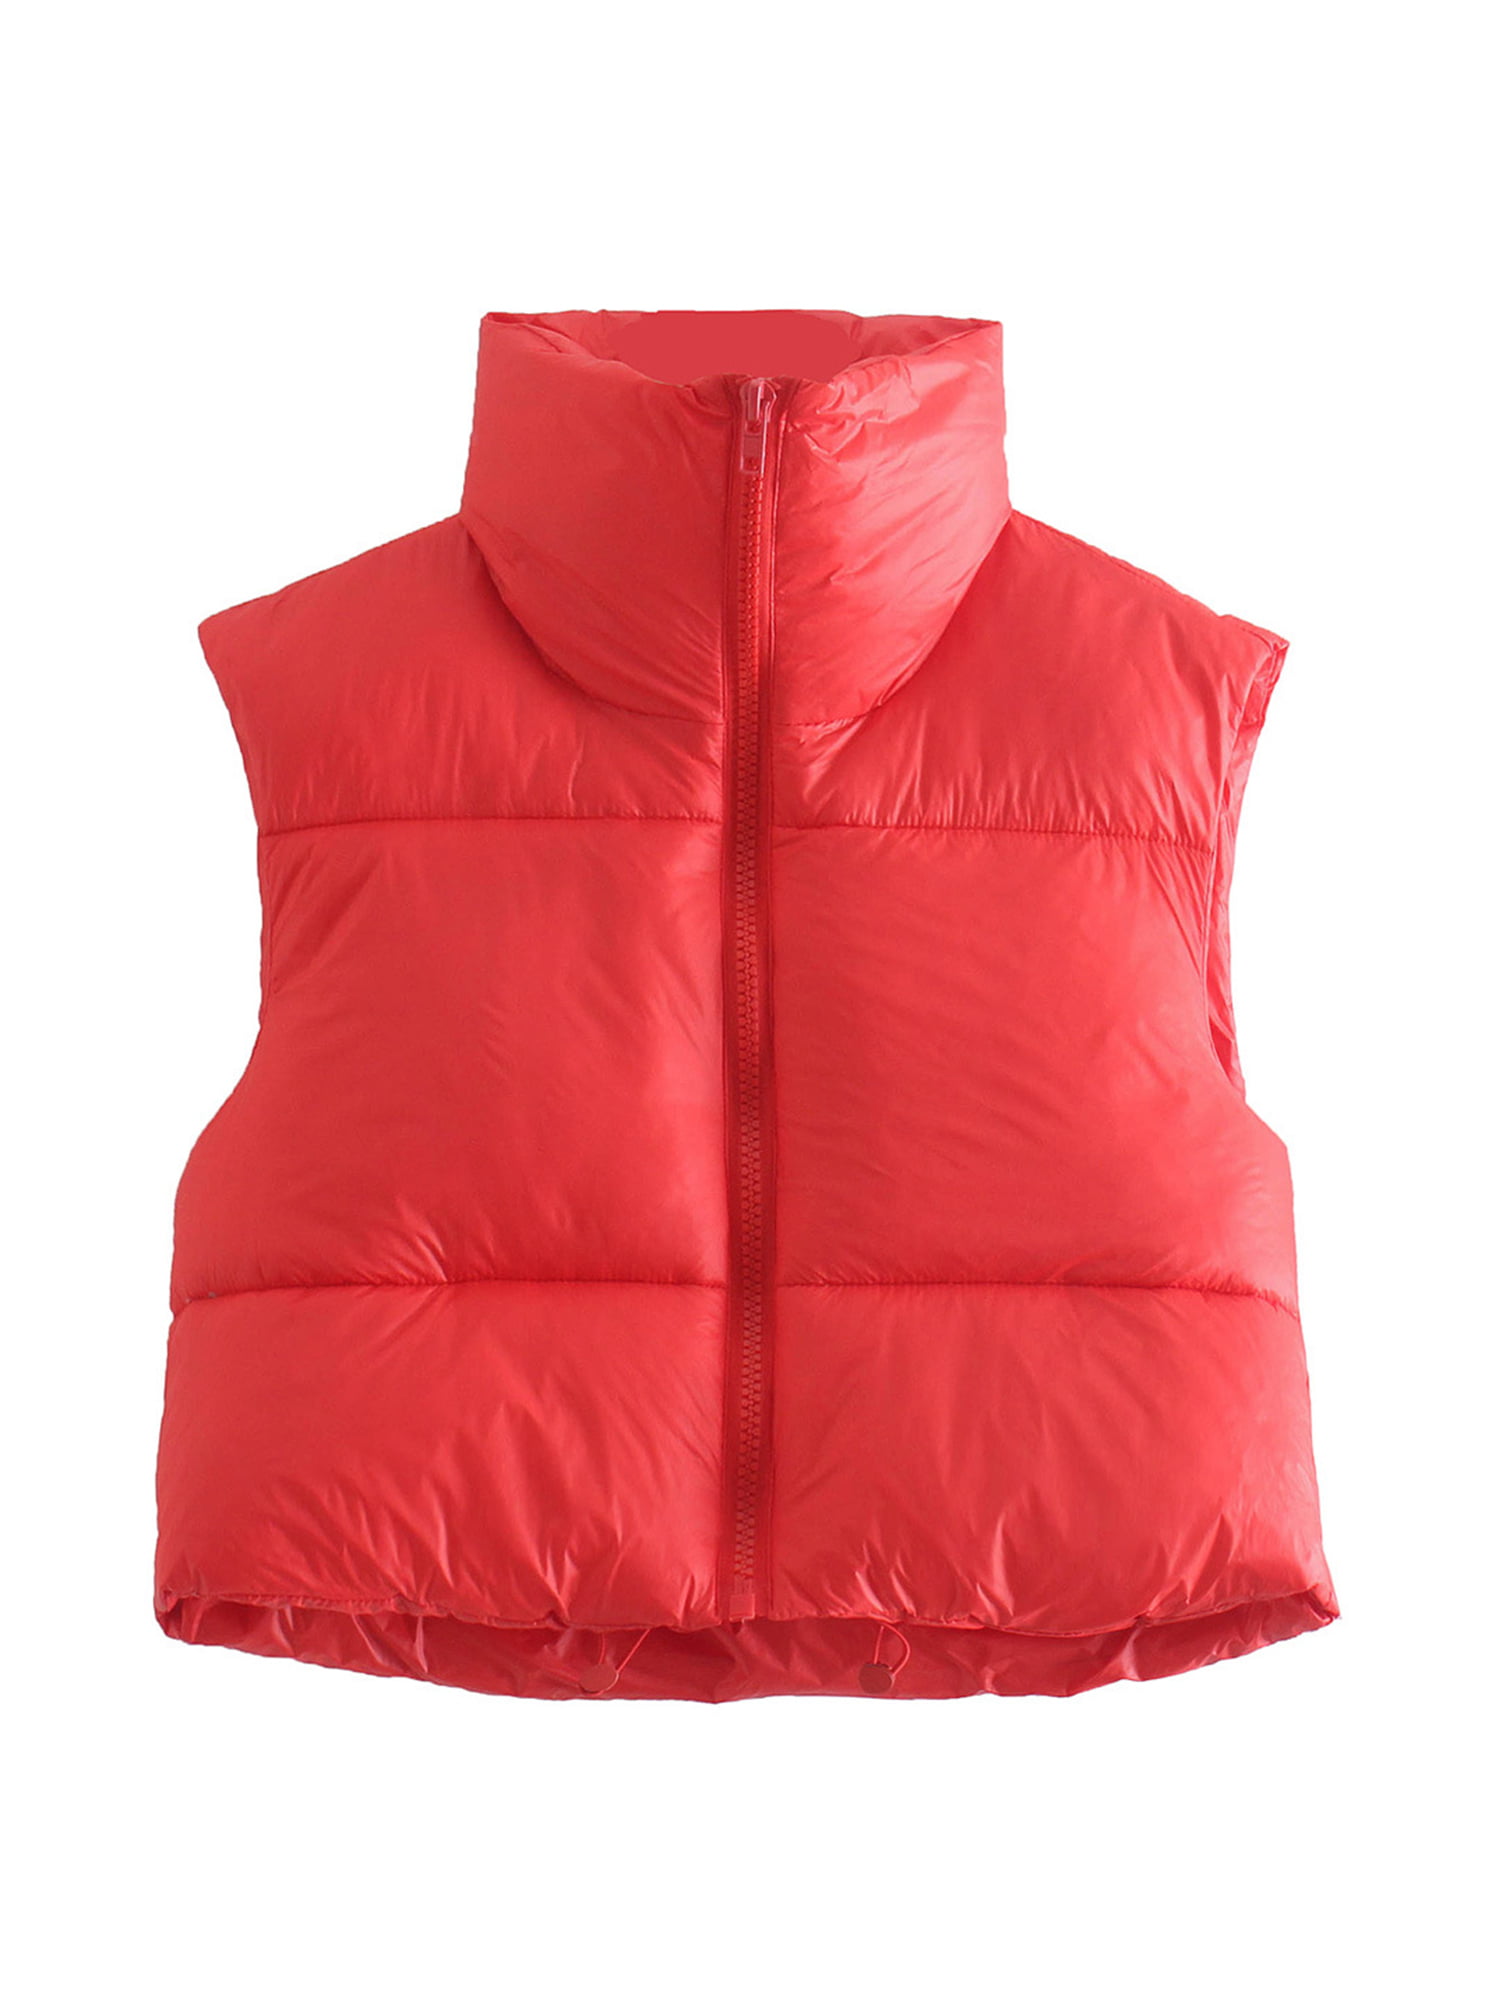 Wrcnote Women Solid Color Drawstring Puffer Vests Lightweight